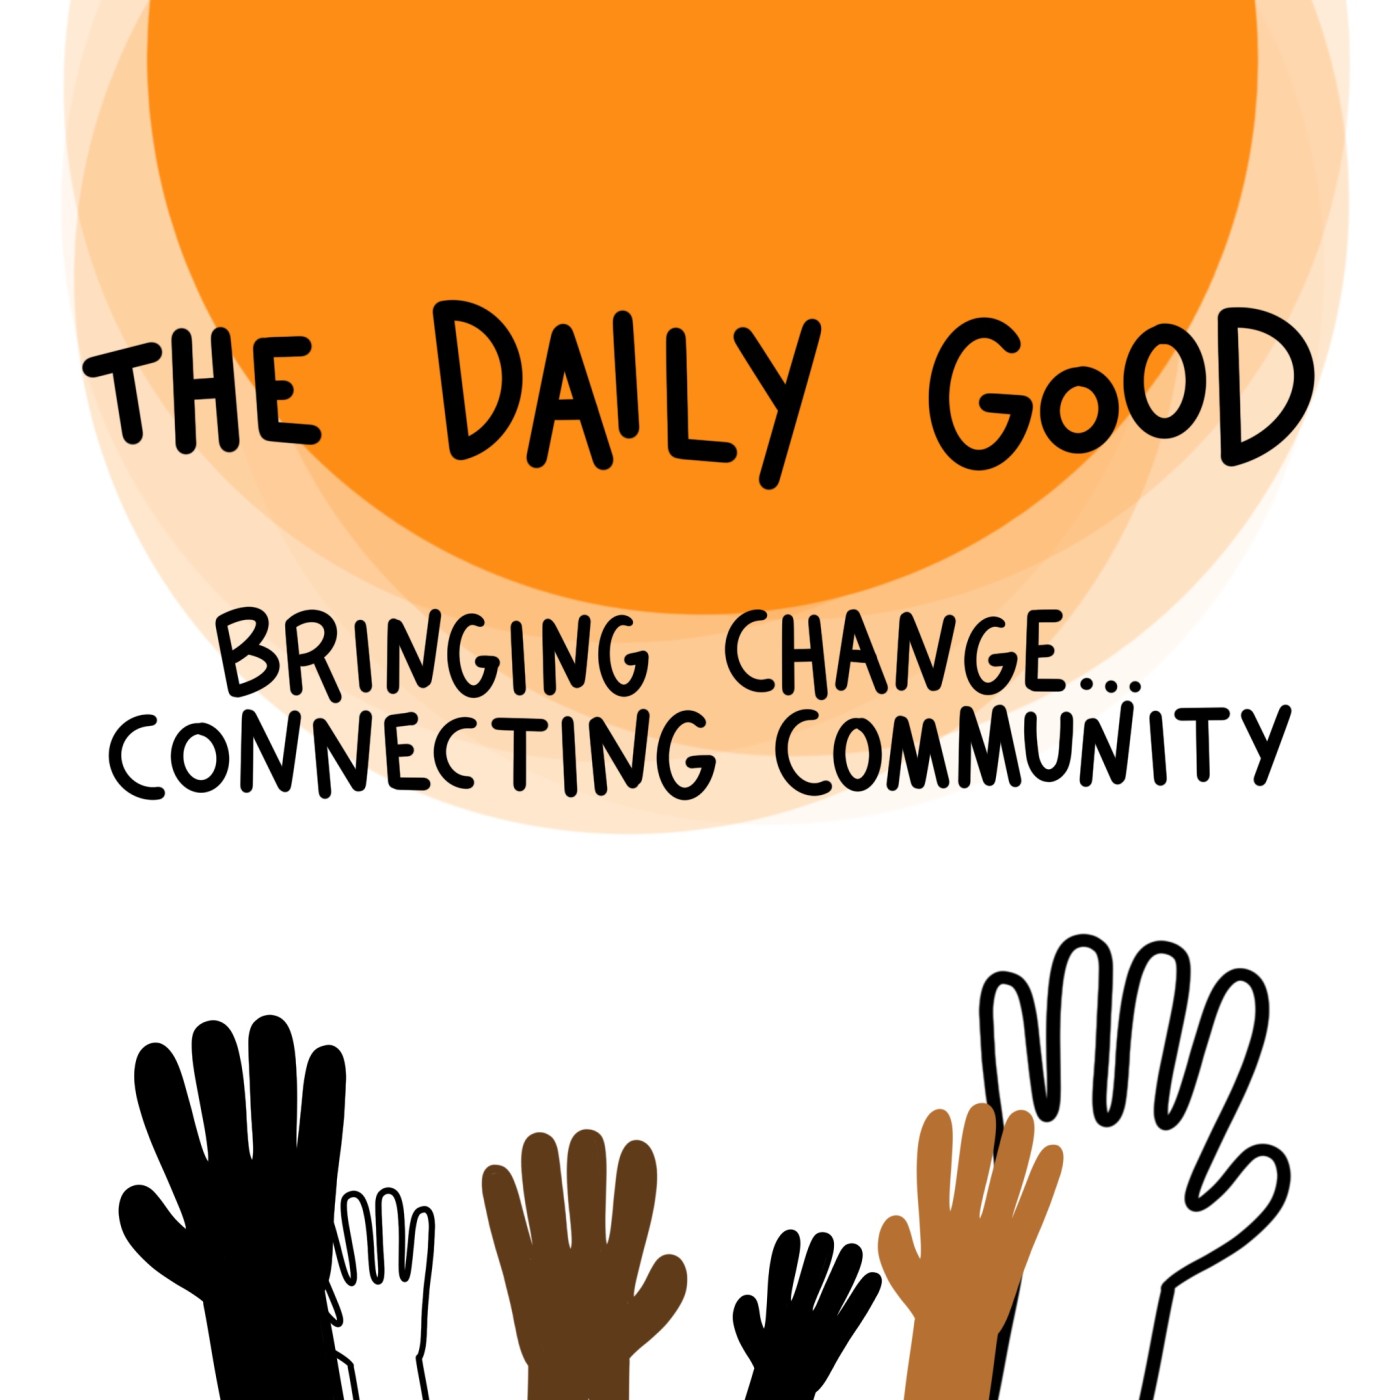 the daily good: bringing change...connecting community